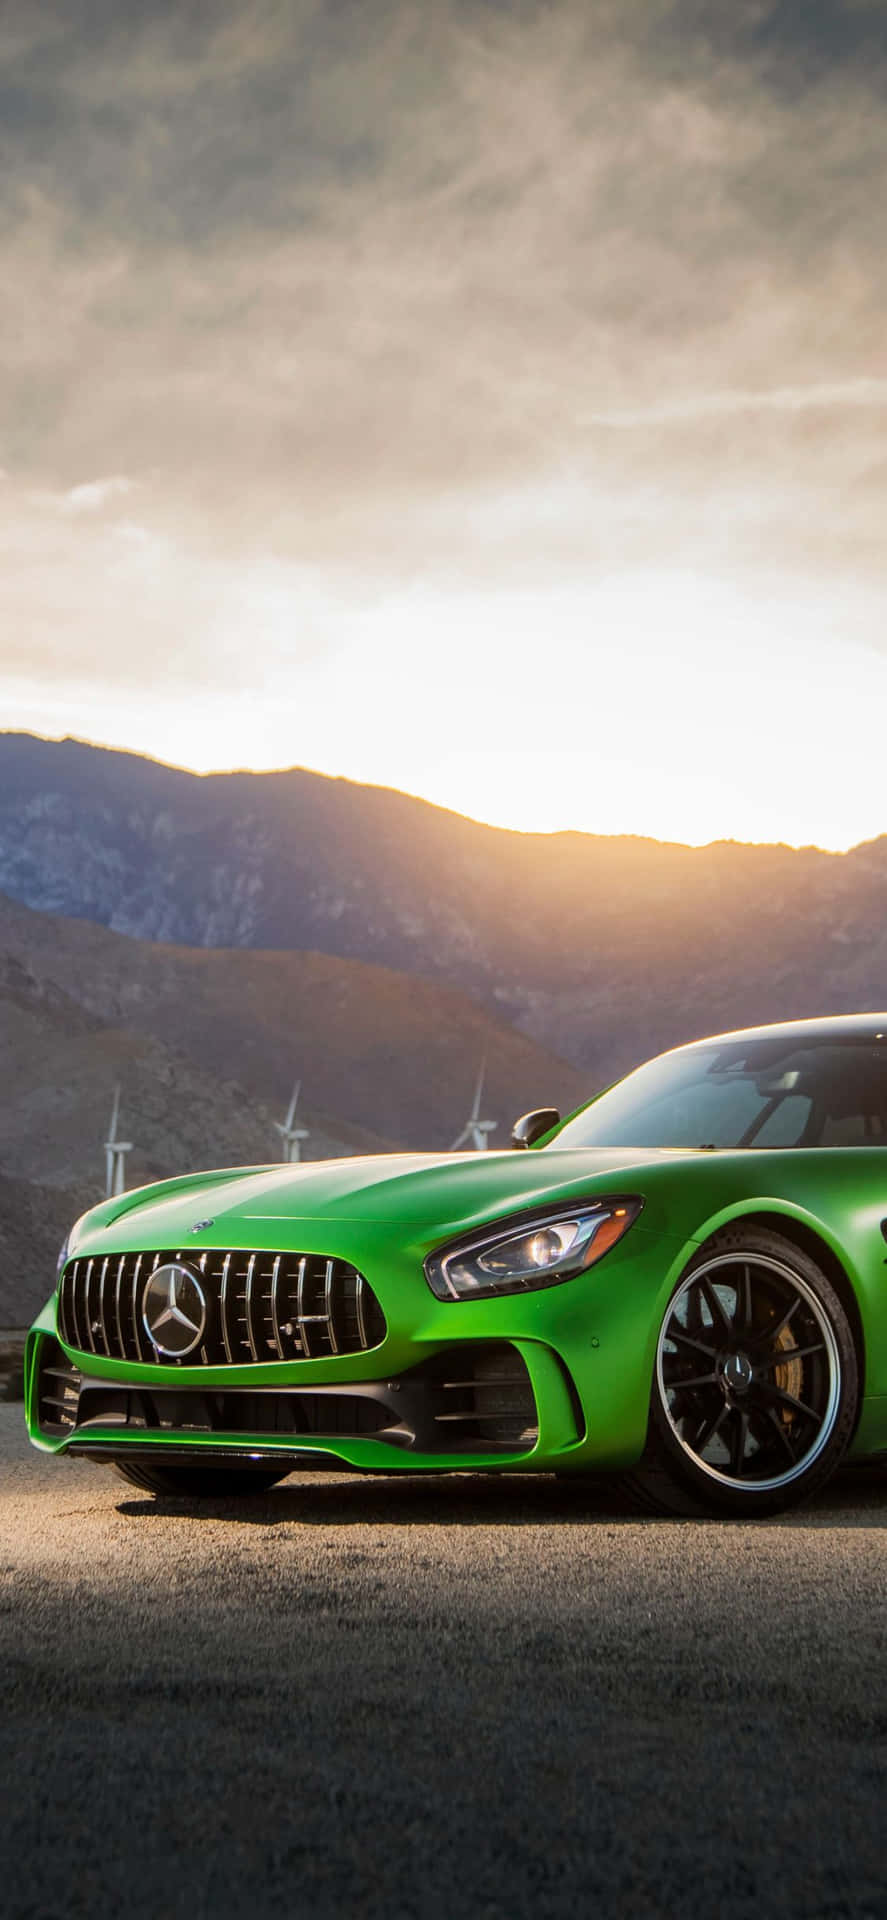 Green Iphone Xs Mercedes Amg Background During Sunset